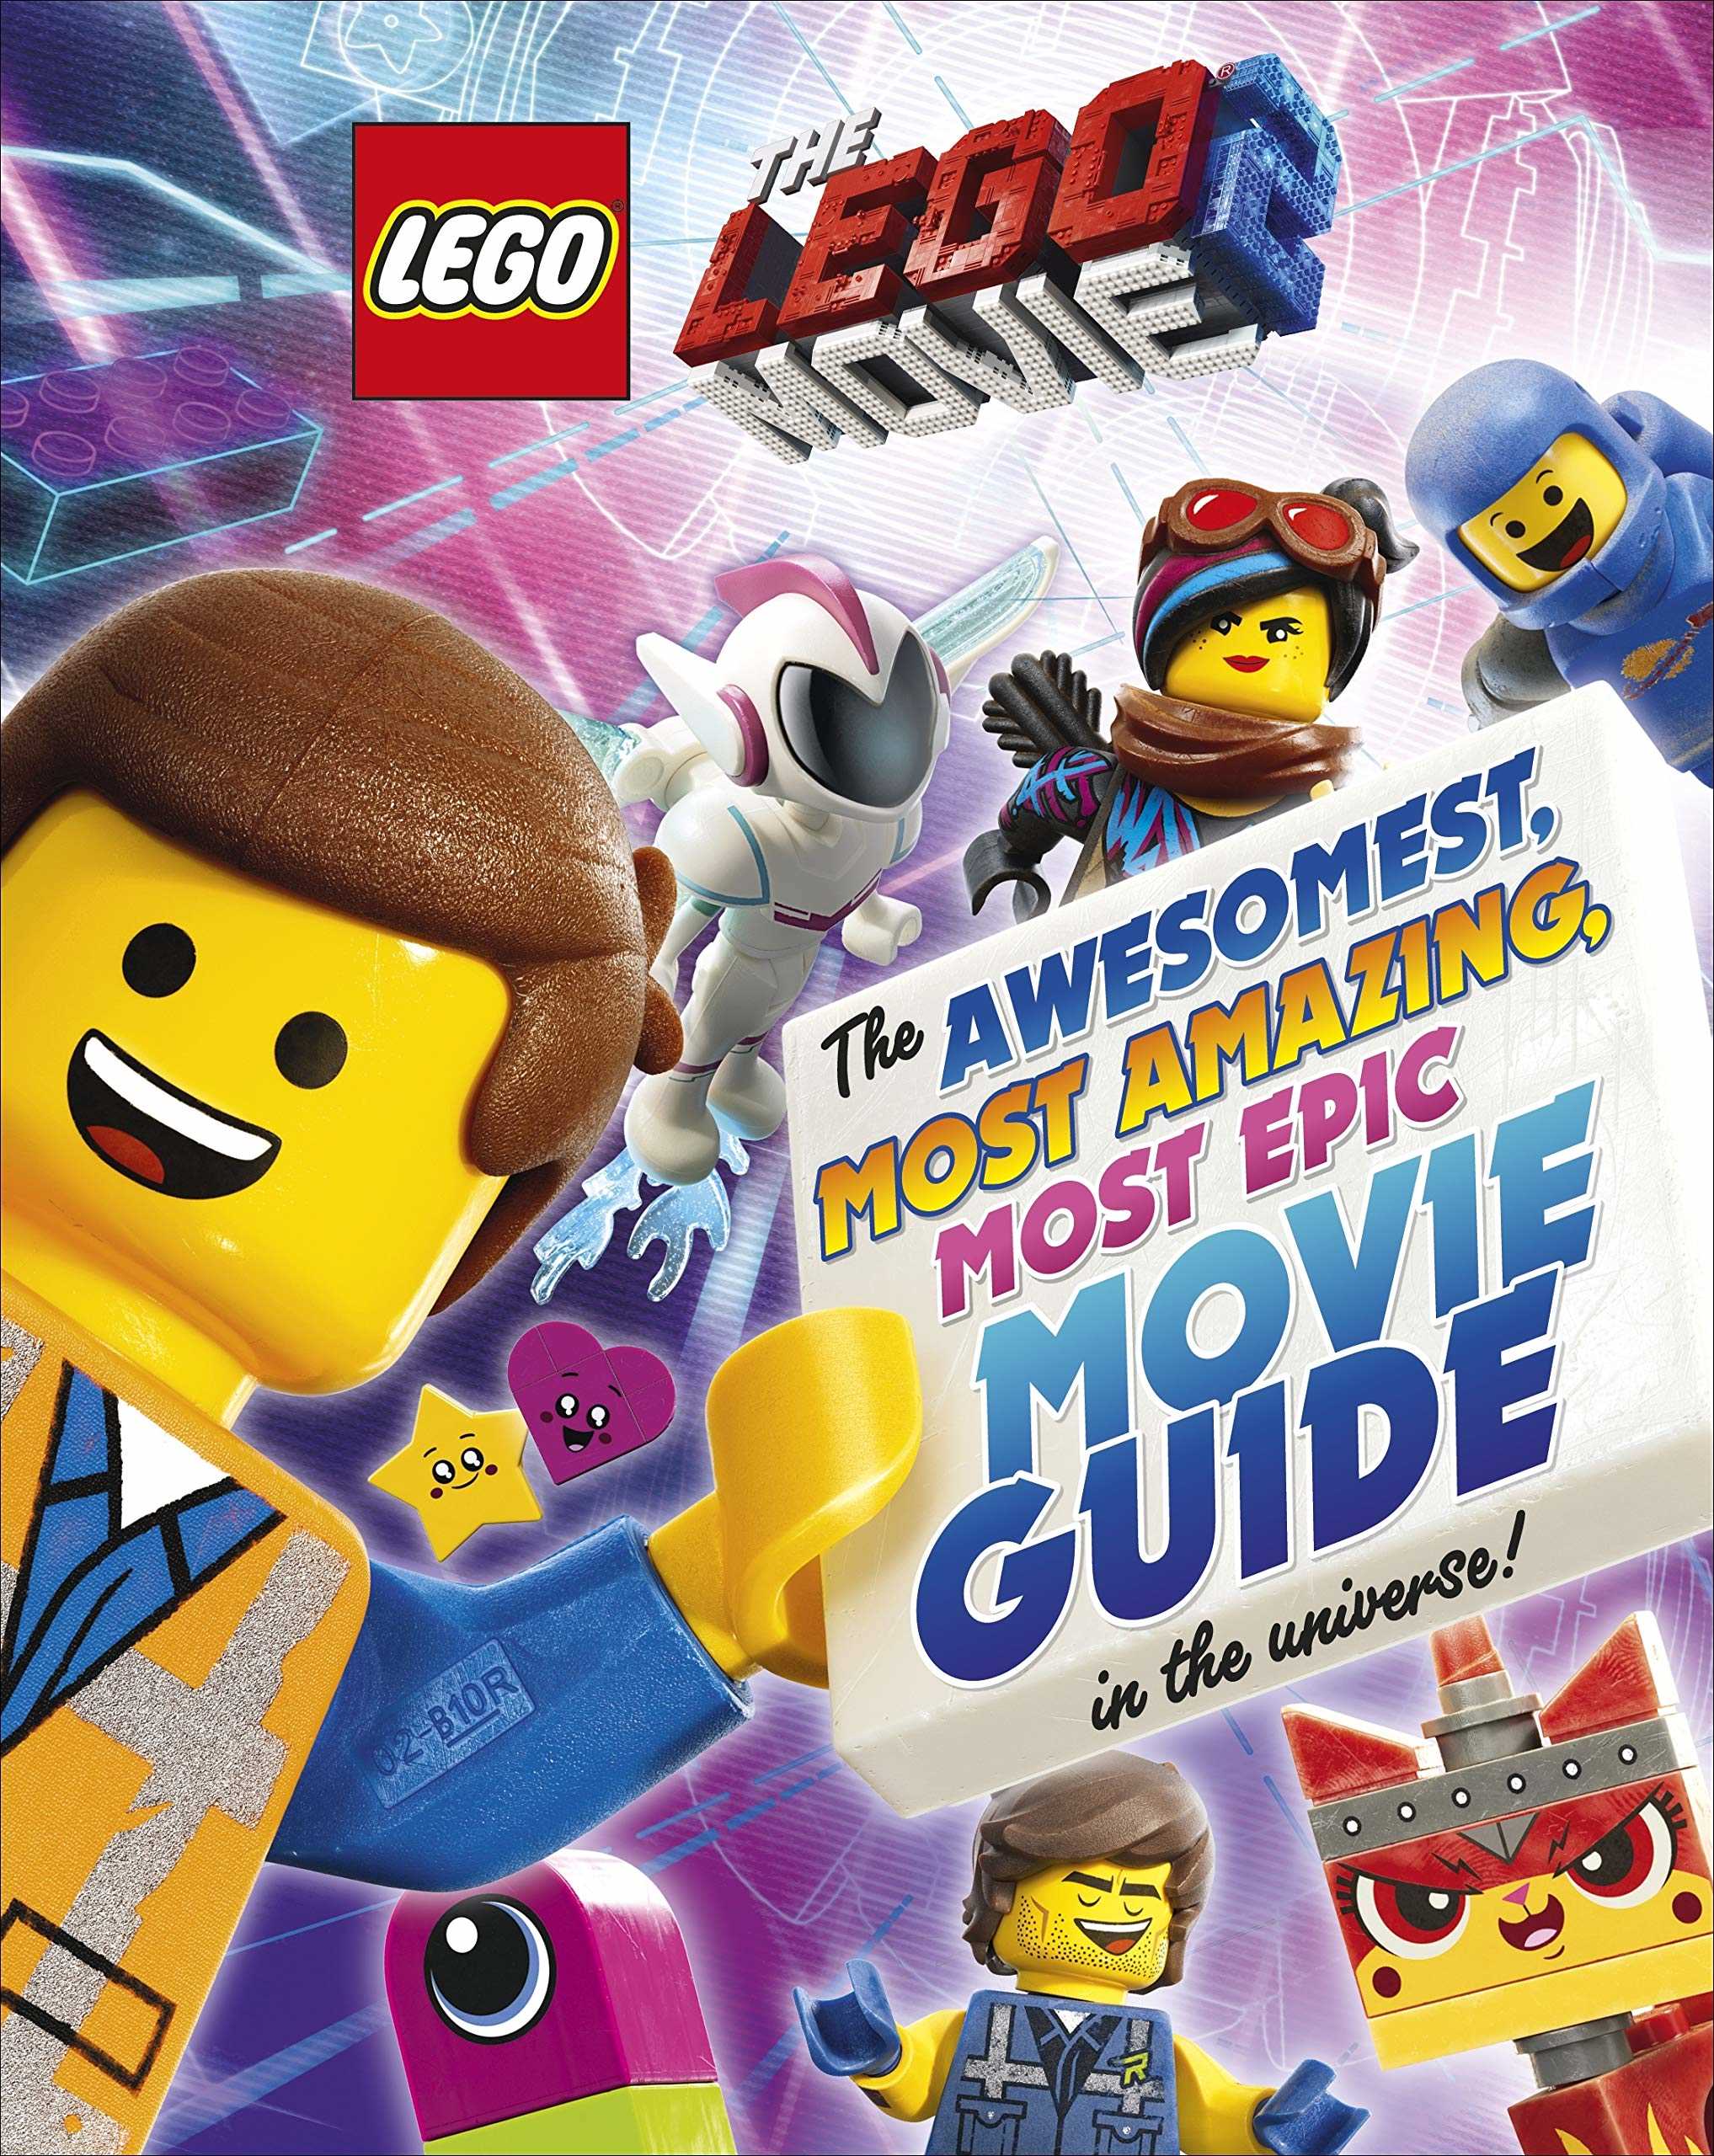 THE LEGO MOVIE 2: The Awesomest, Amazing, Most Epic Movie Guide in the Universe!